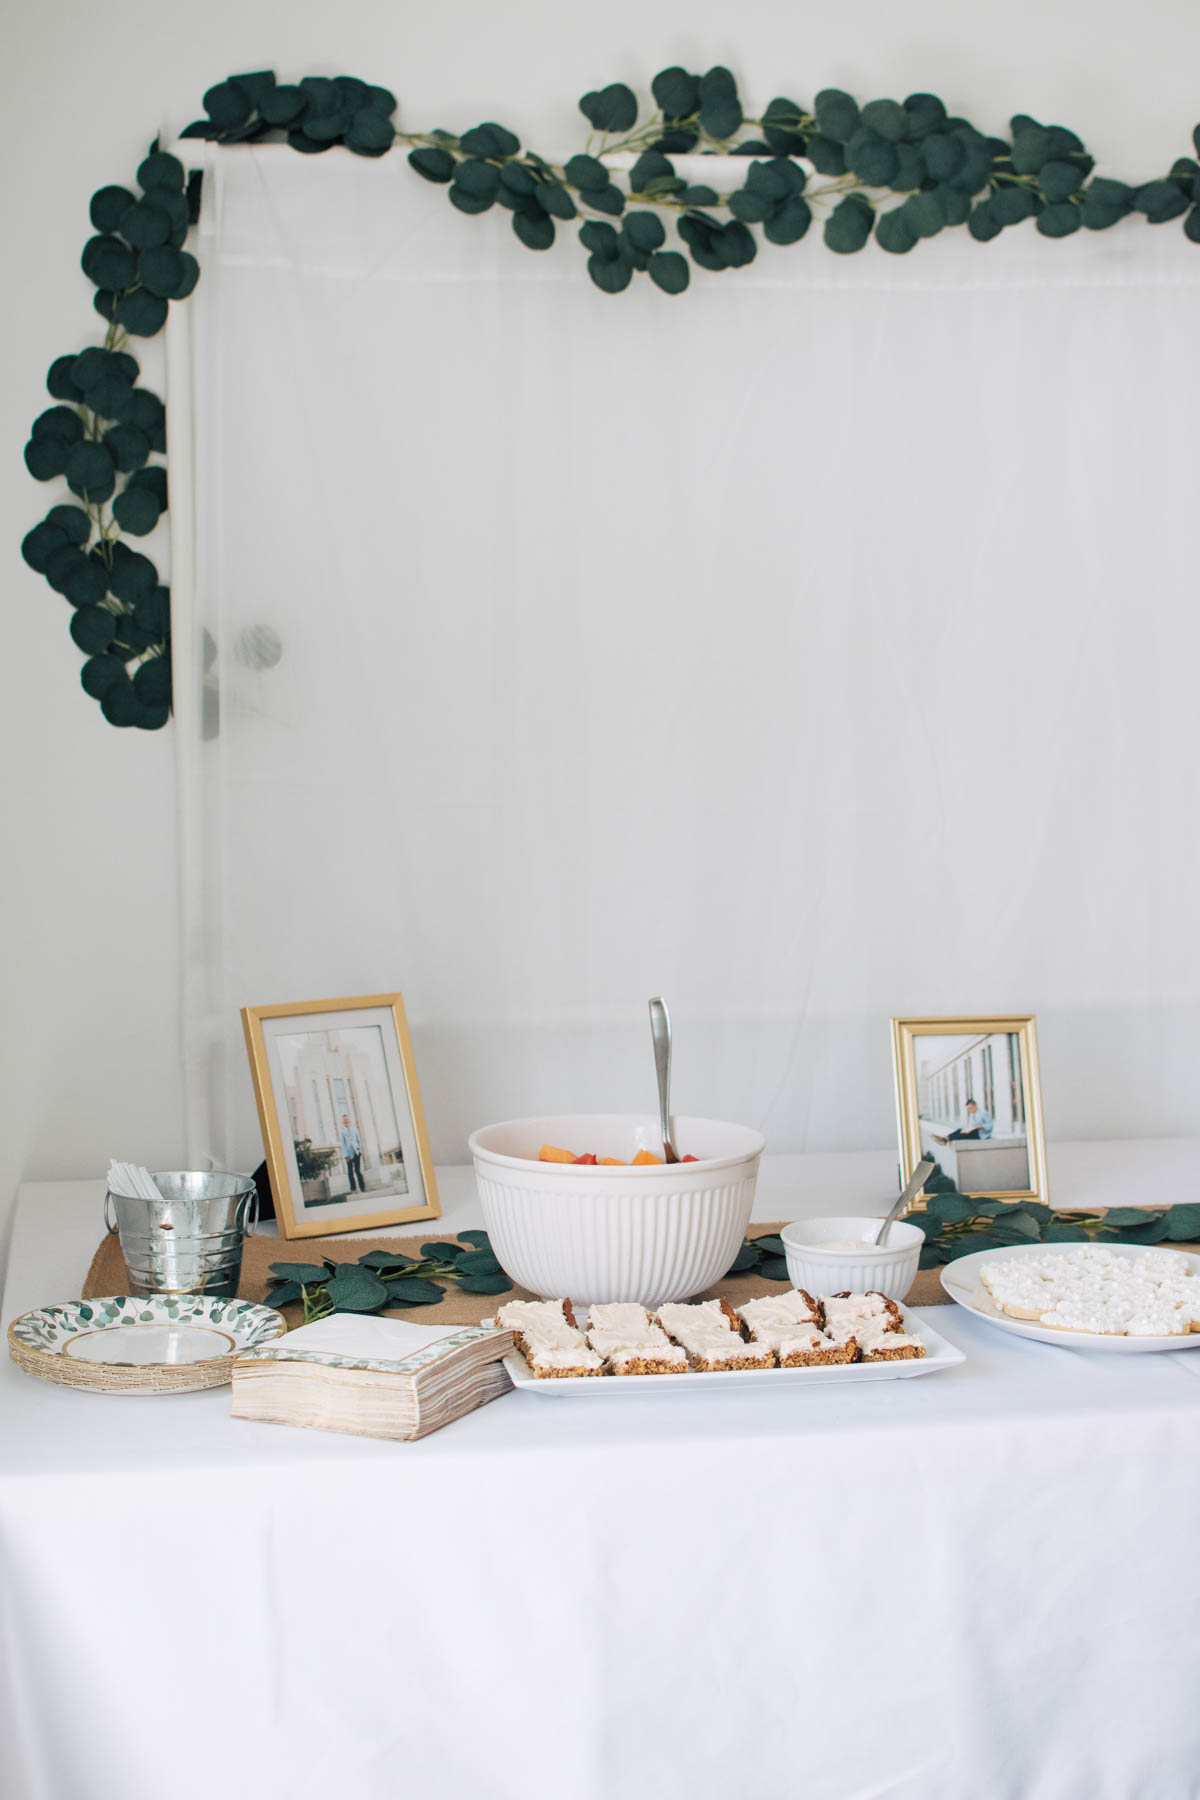 LDS baptism party backdrop and food table with eucalyptus garland and white table cloth.